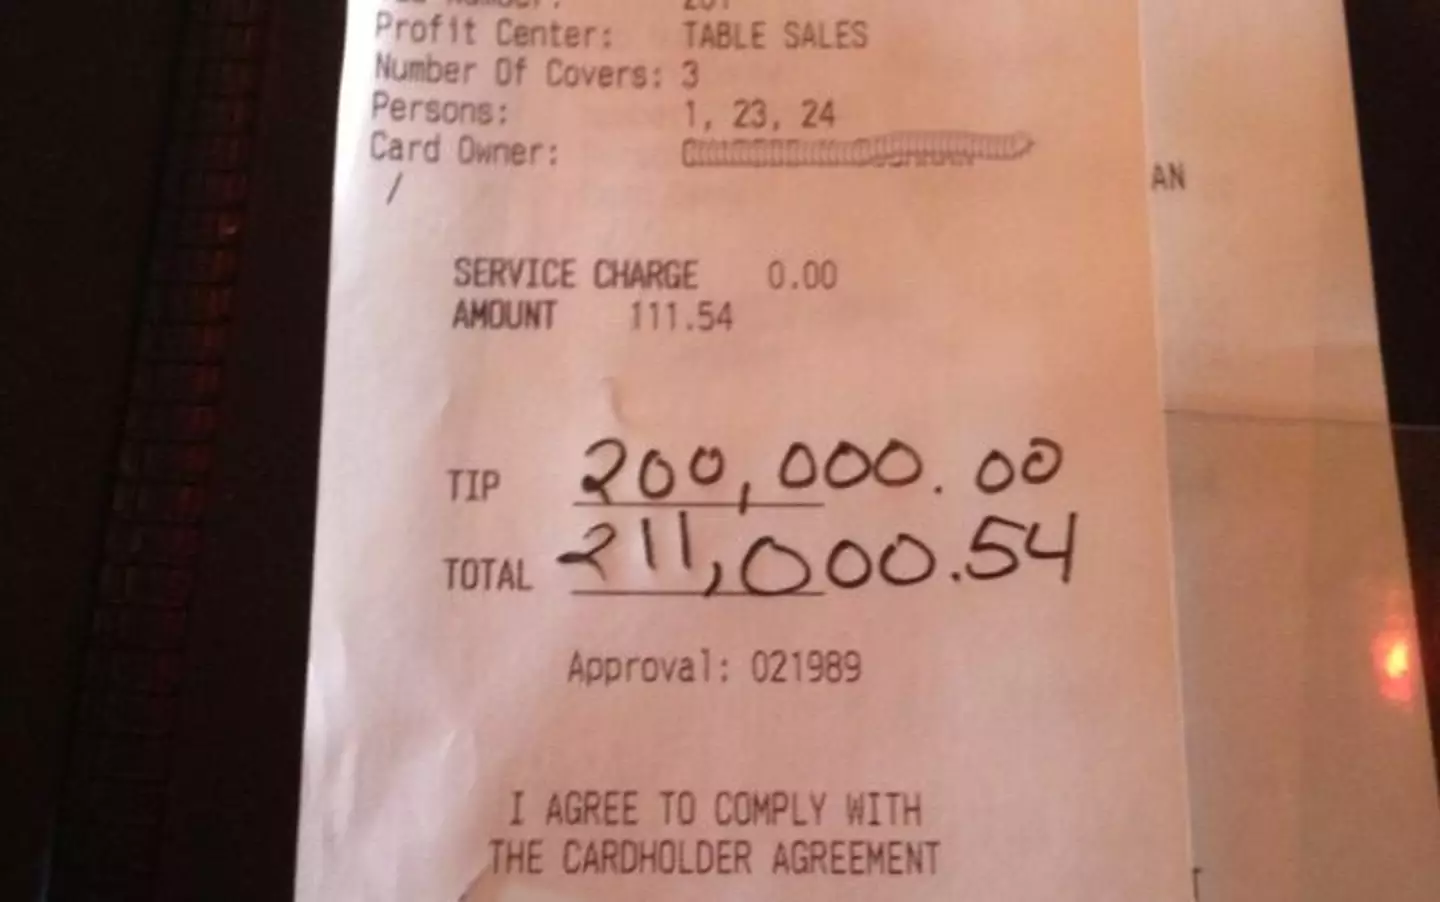 The receipt revealed a mind-blowing tip.